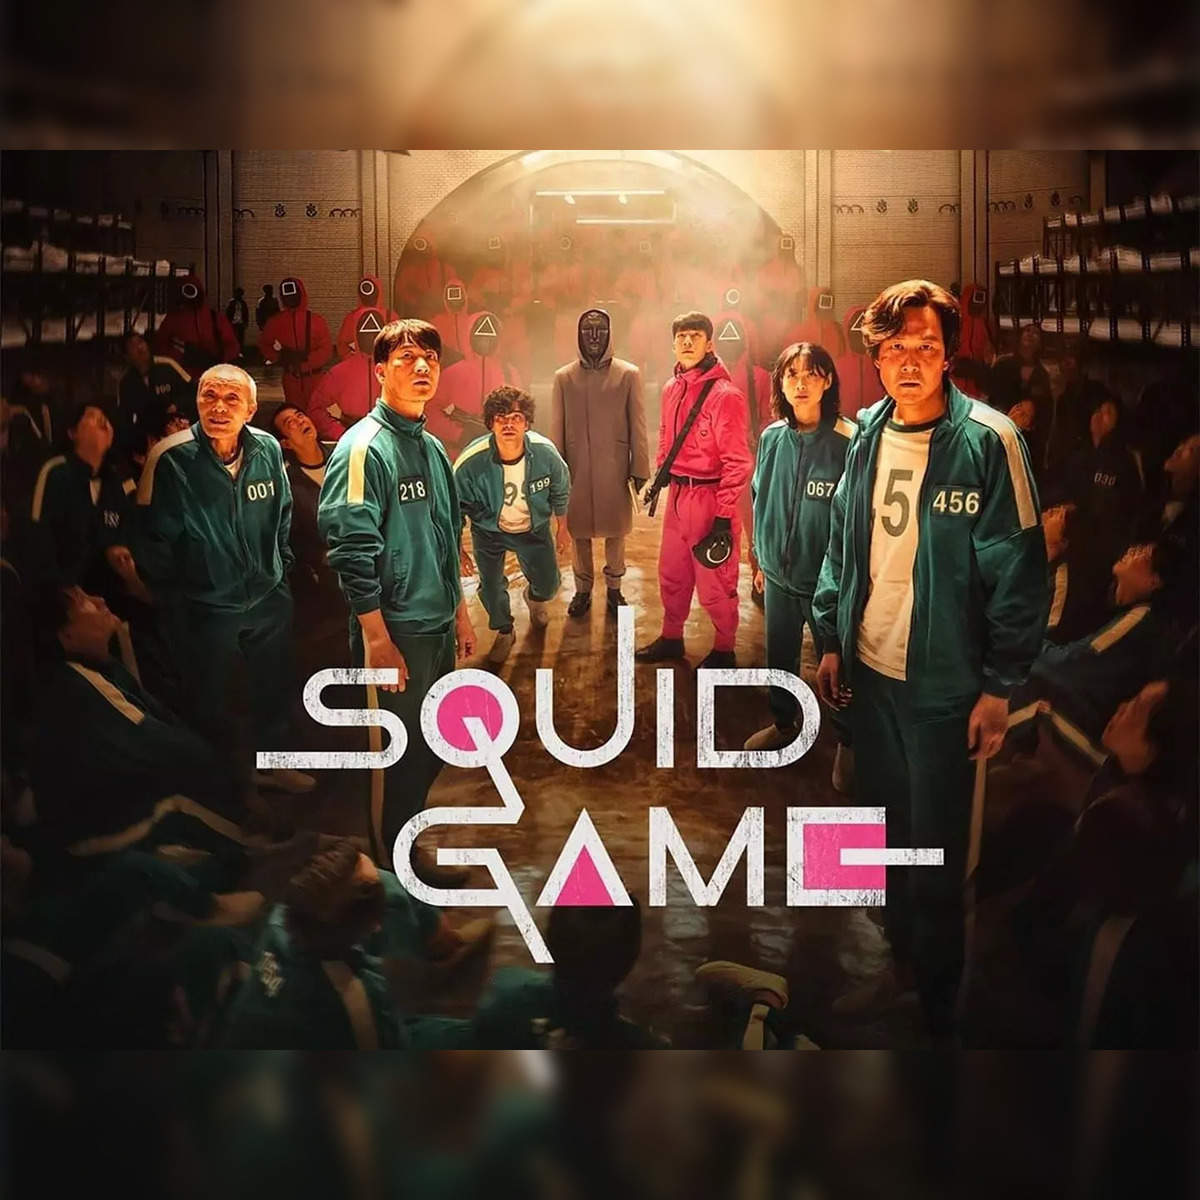 Squid Game Season 2: 'Squid Game' Season 2: All you may want to